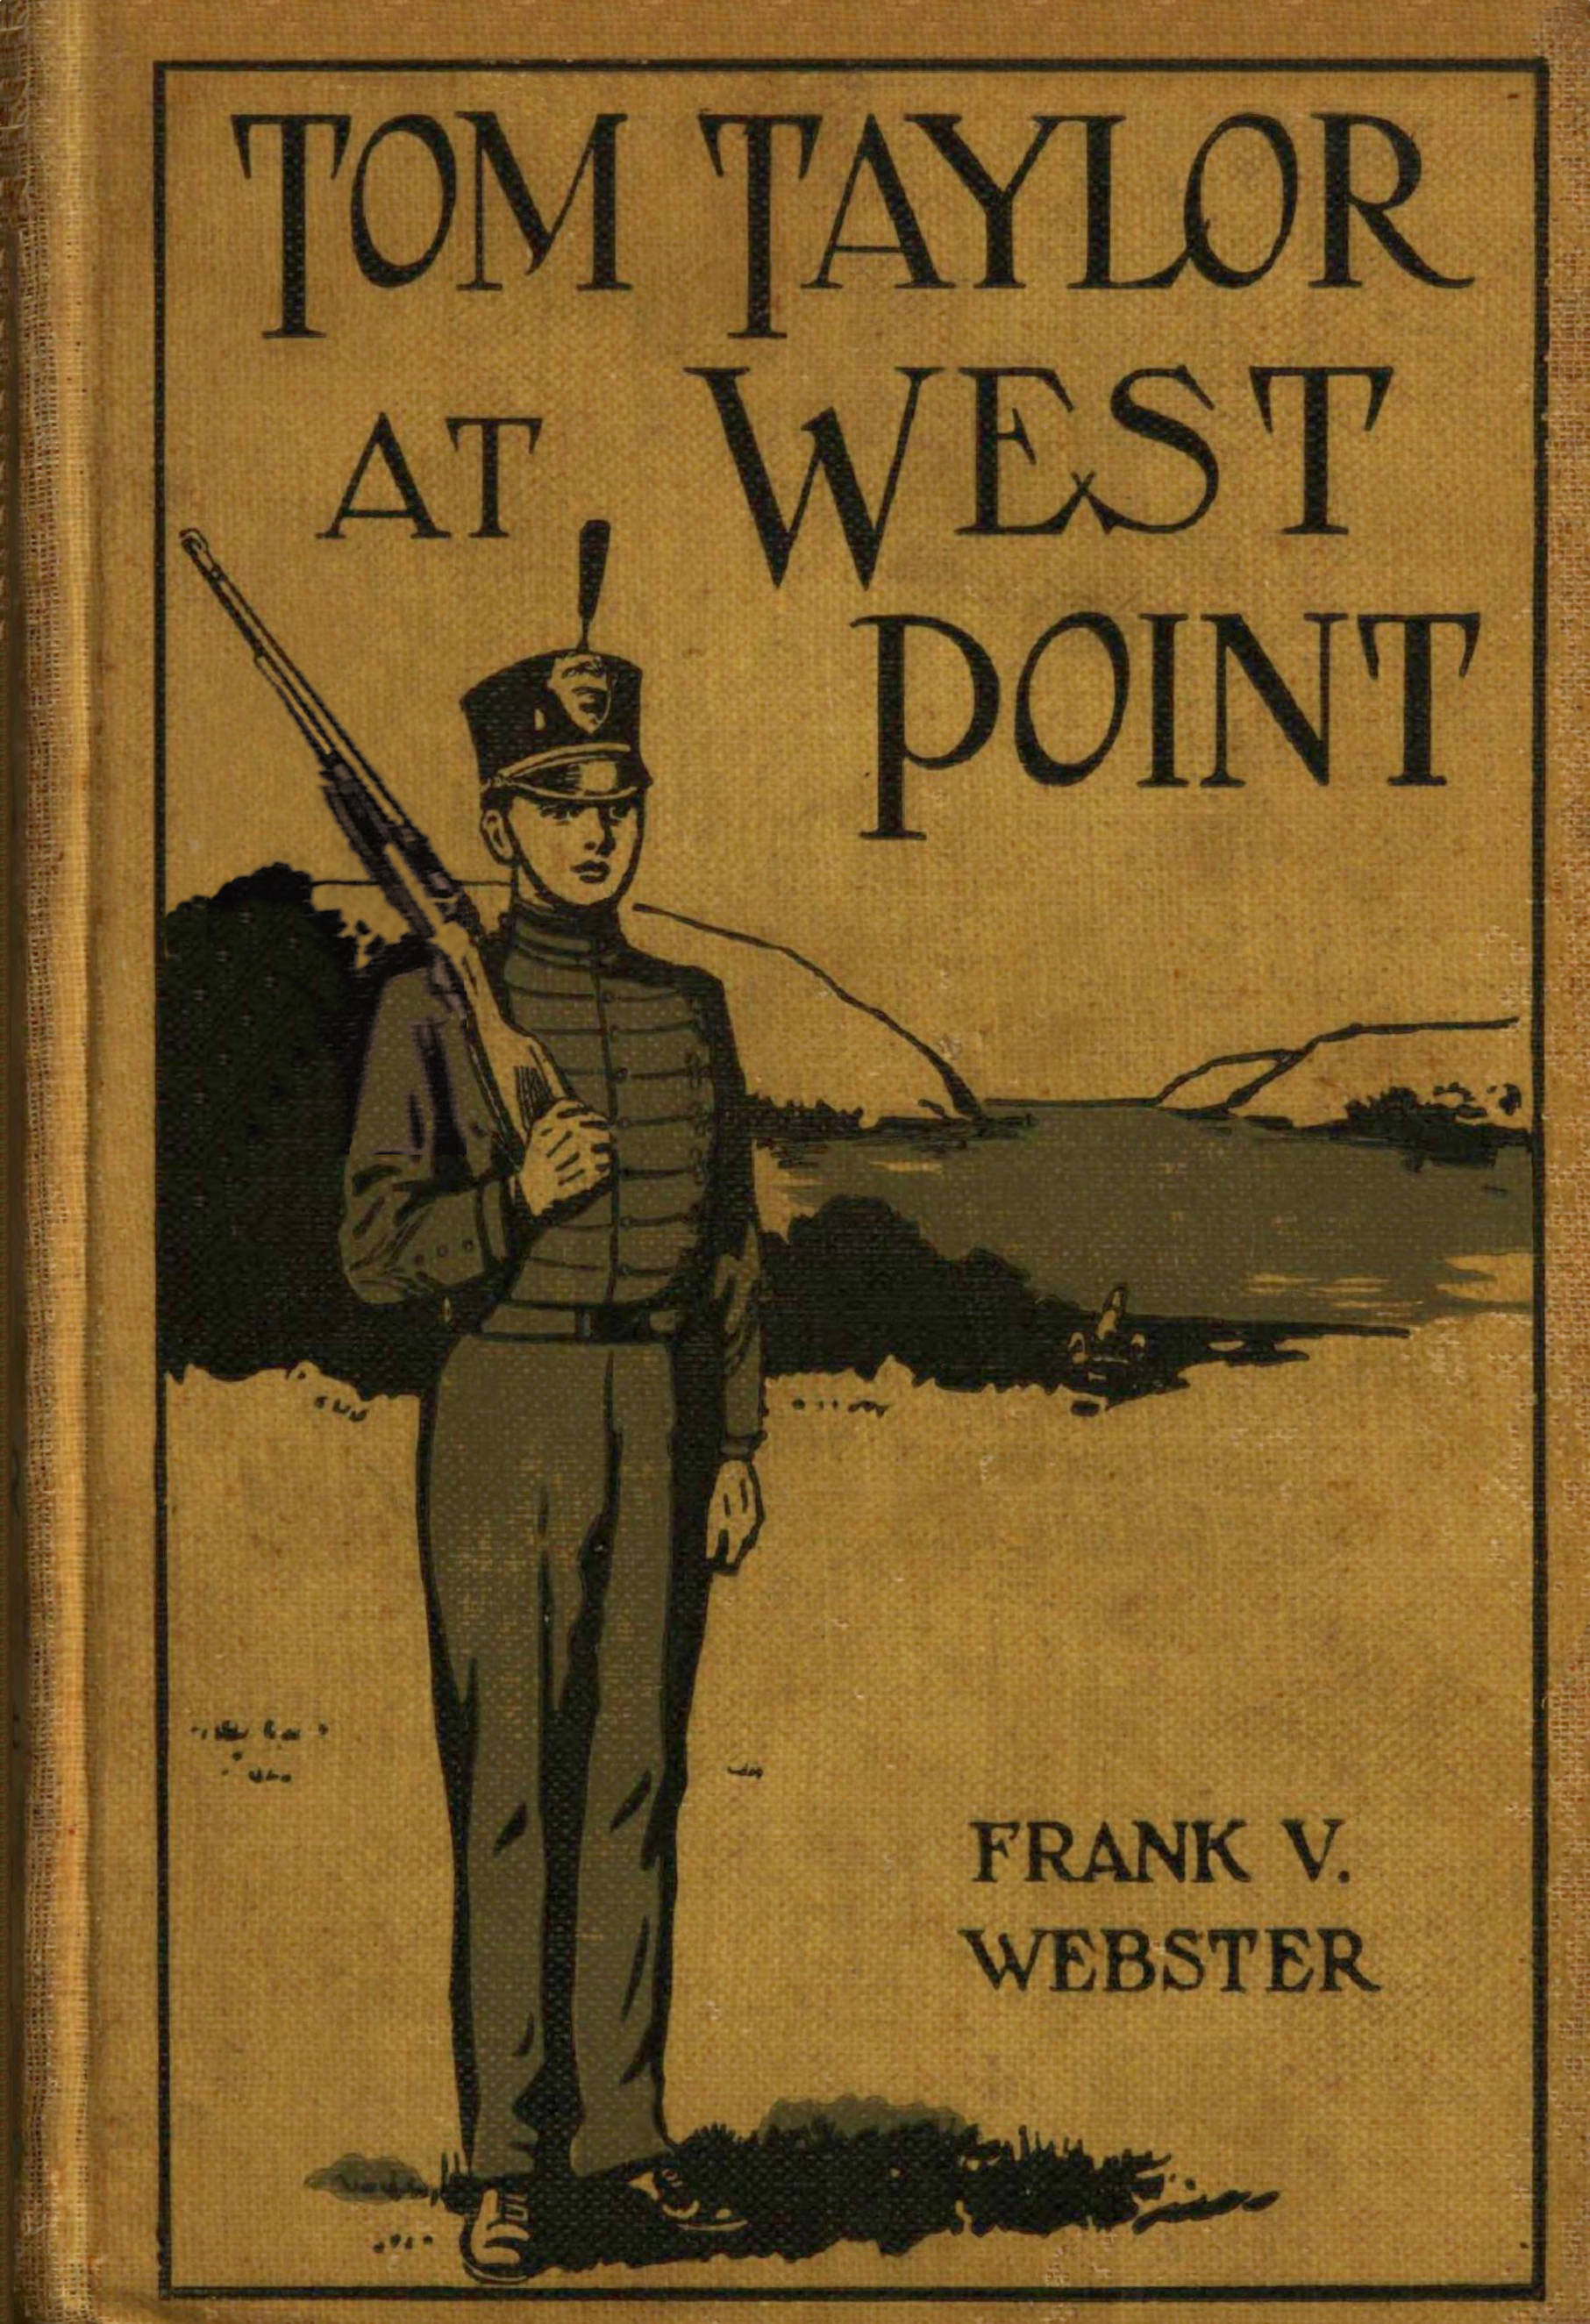 Tom Taylor at West Point